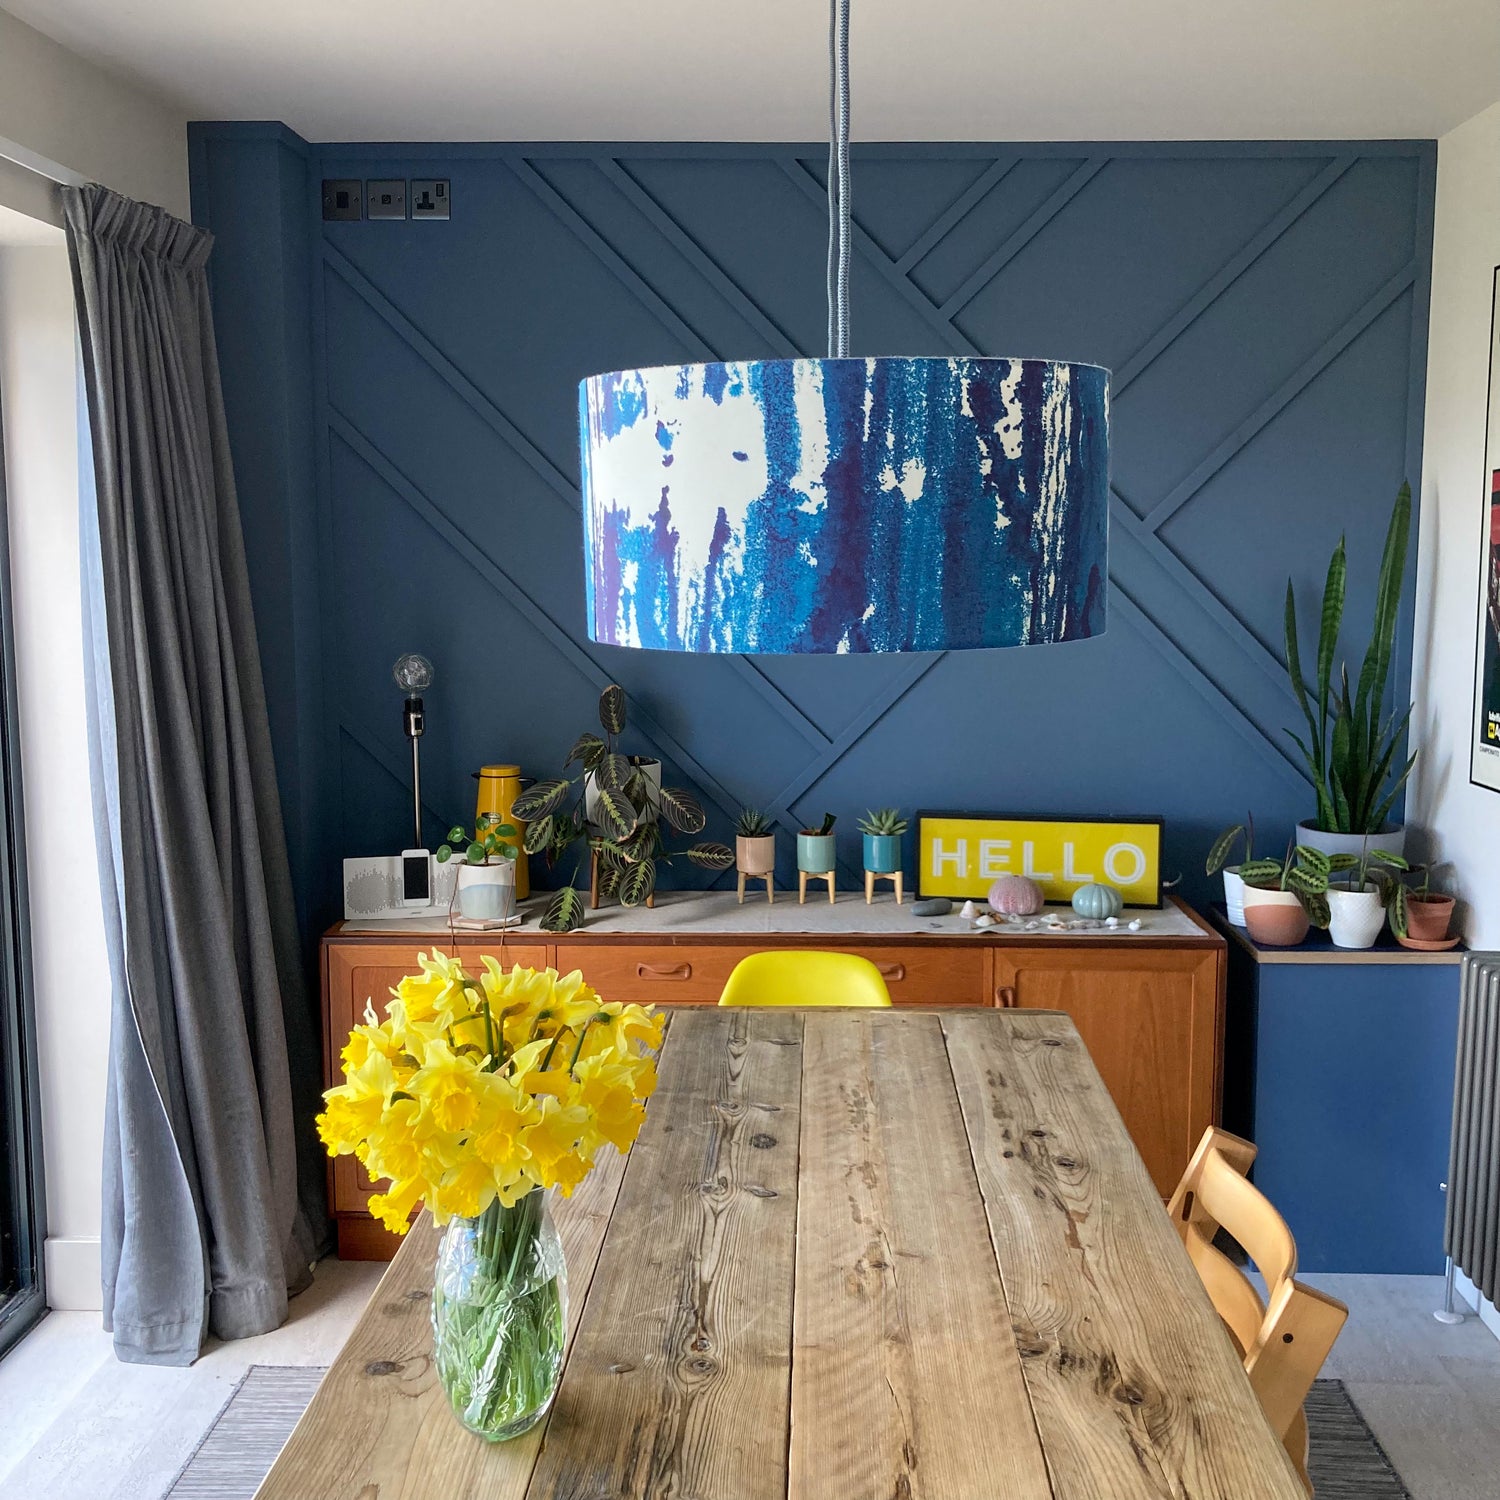 A dining table scene – a sea print hanging pendant lampshade hangs centrally over a scaffold board table with a vase full of daffodils sat on it. At the end of the room there is a dark blue feature wall, mid century sideboard and various house plants.